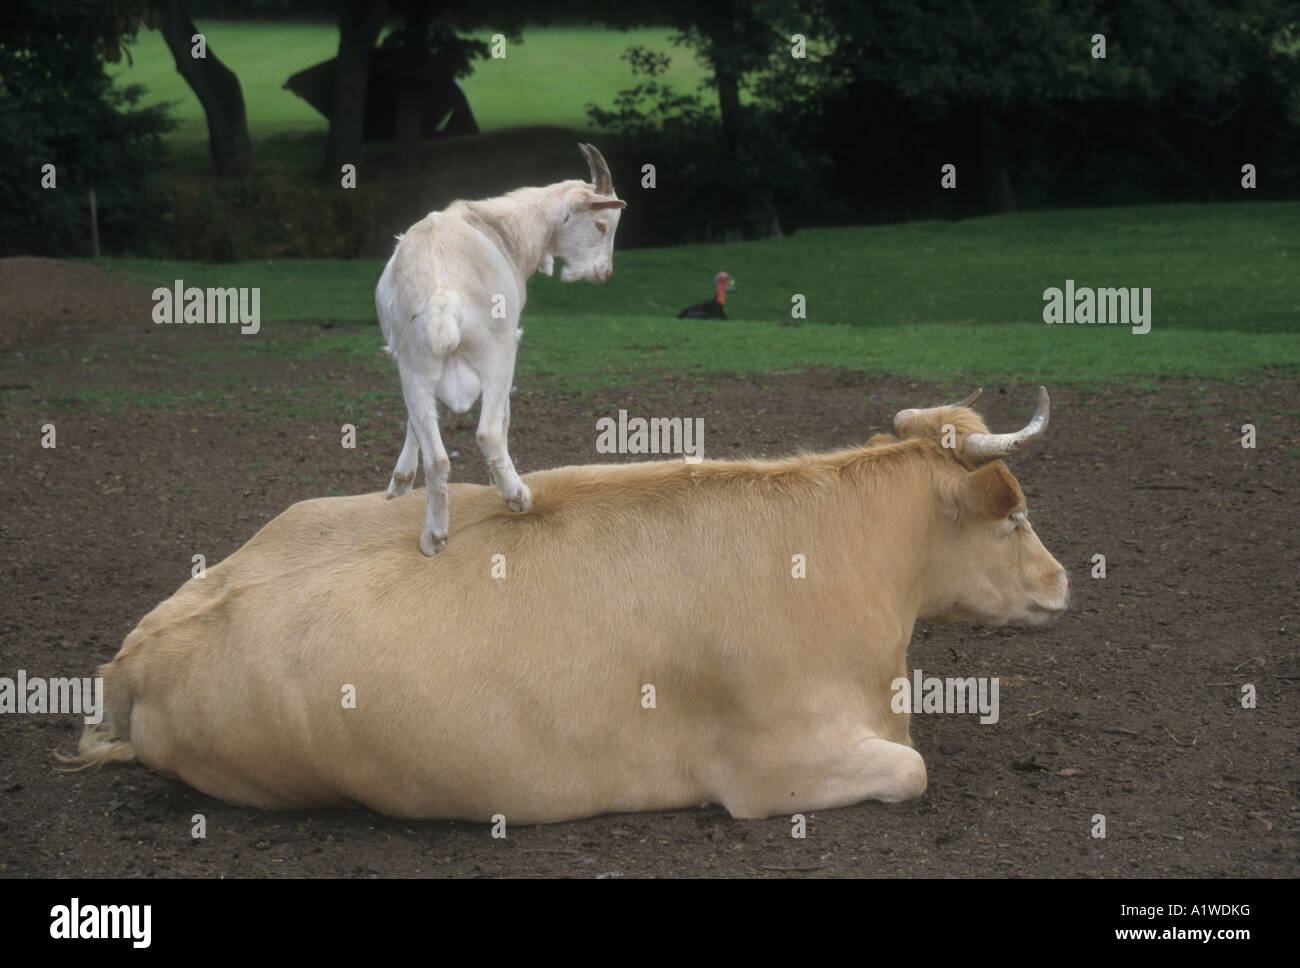 An Amusing Picture Of A White Goat Standing On The Back Of A Young Bull . Stock Photo